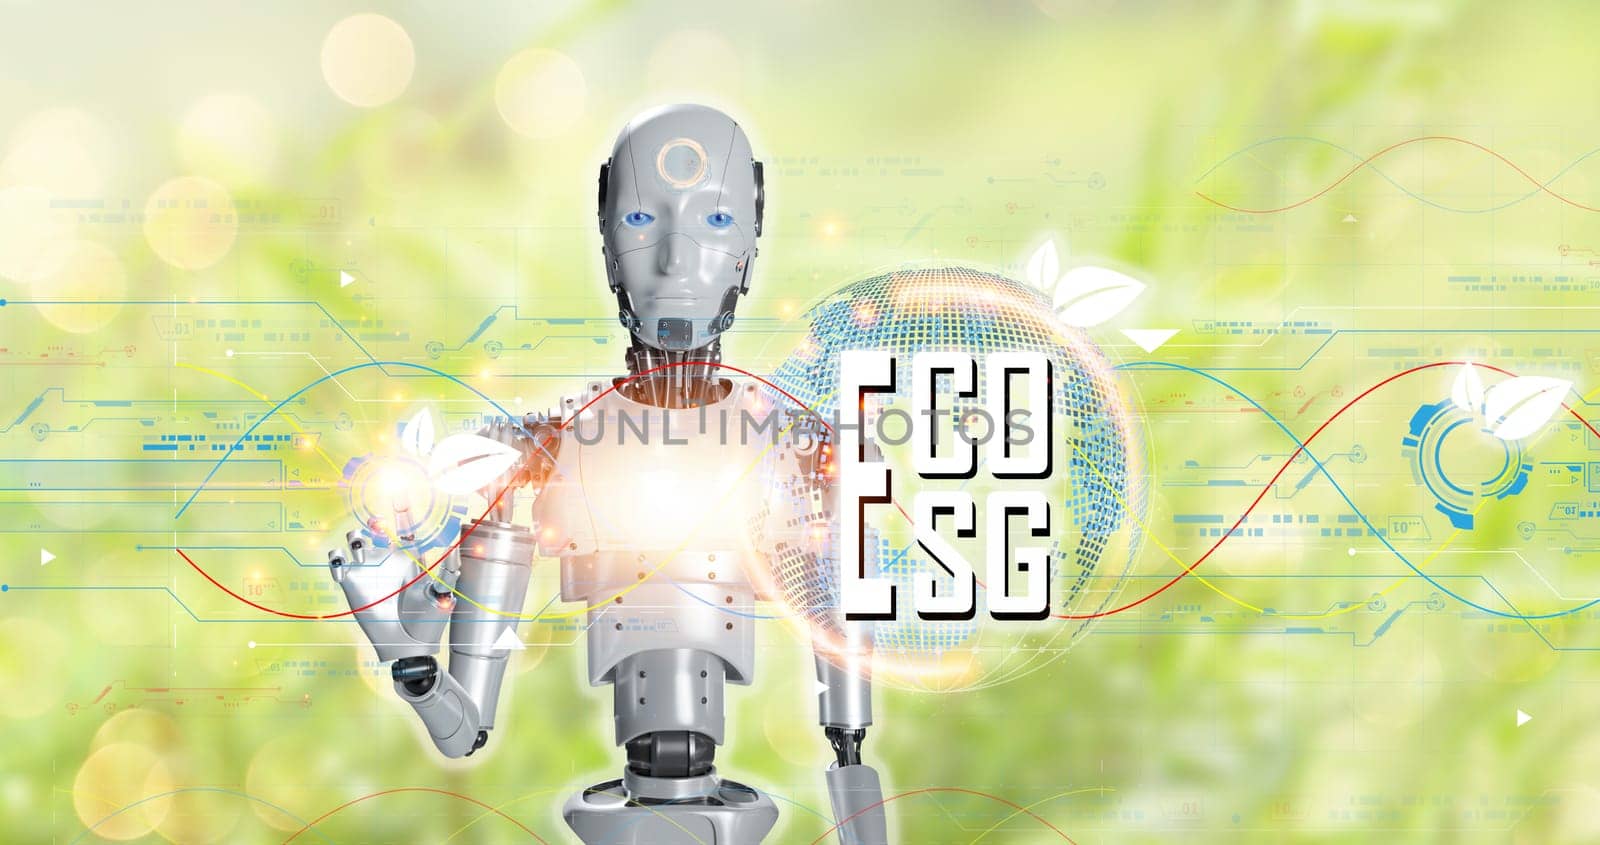 The concept is to combine ESG and ECO systems with artificial intelligence to optimize efficiency. by boonruen